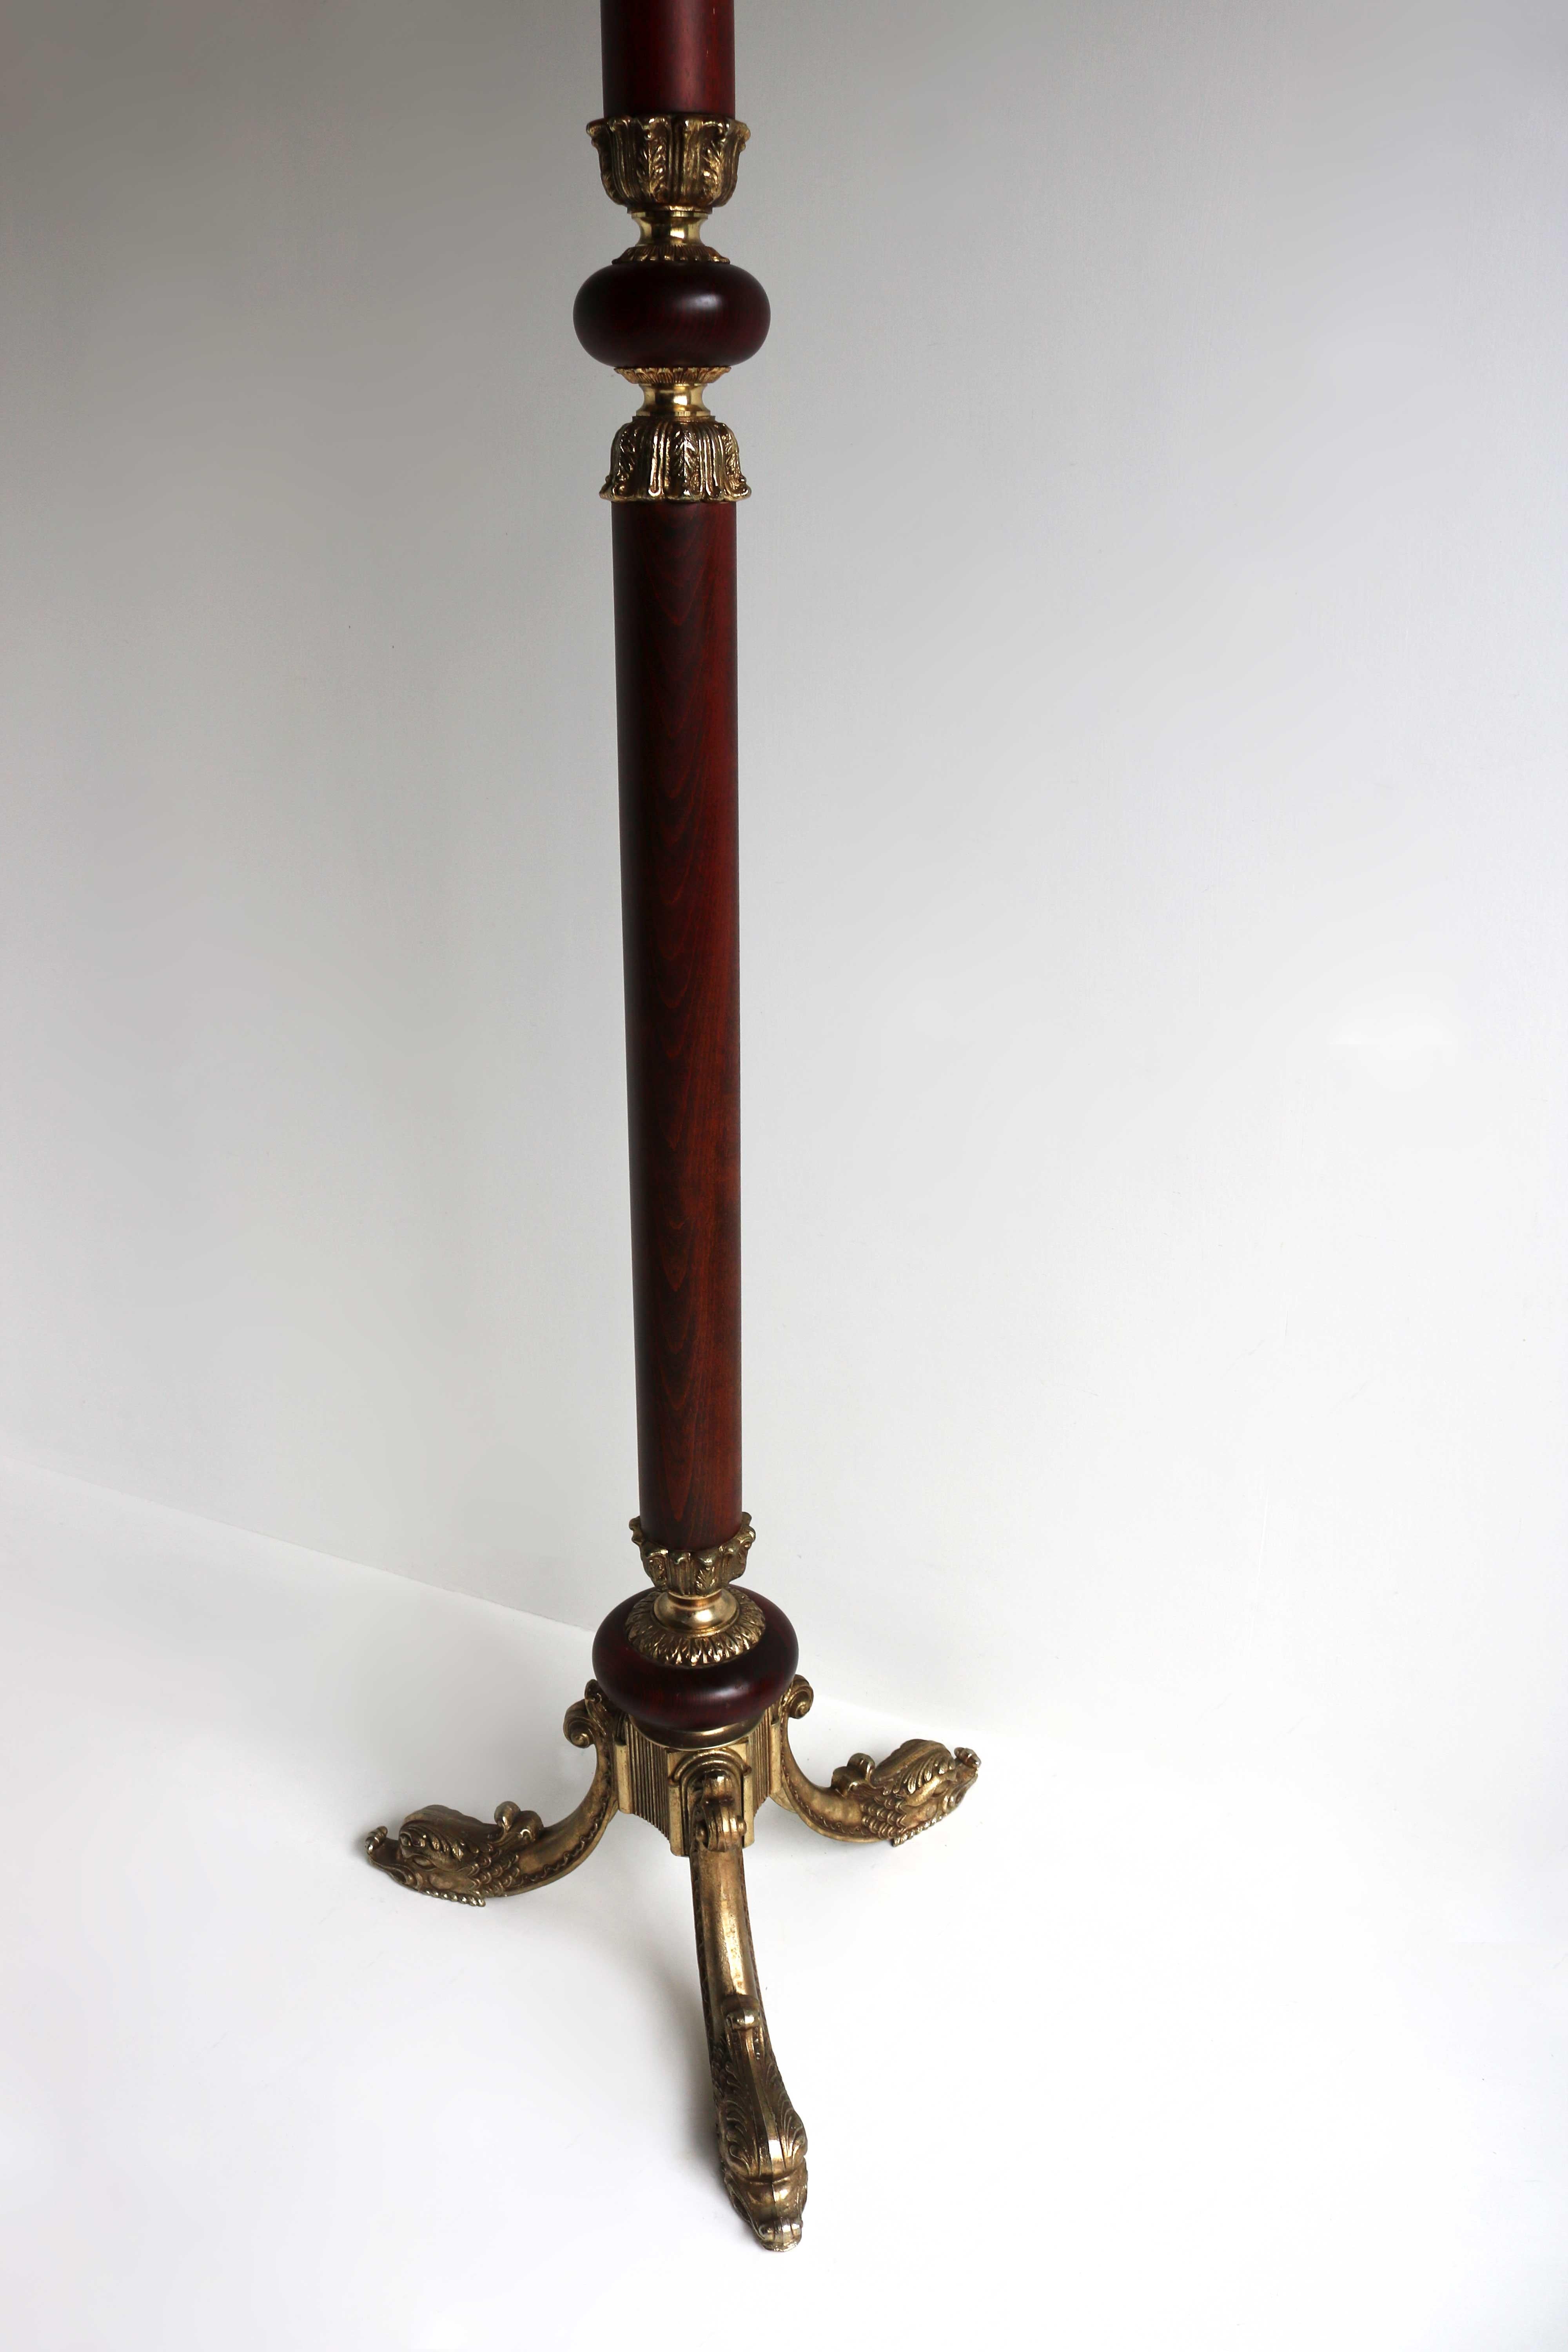 Hand-Crafted Italian Ornate Brass & Wood Coat Hat Rack Hall Tree Floor Stand Neo Classical